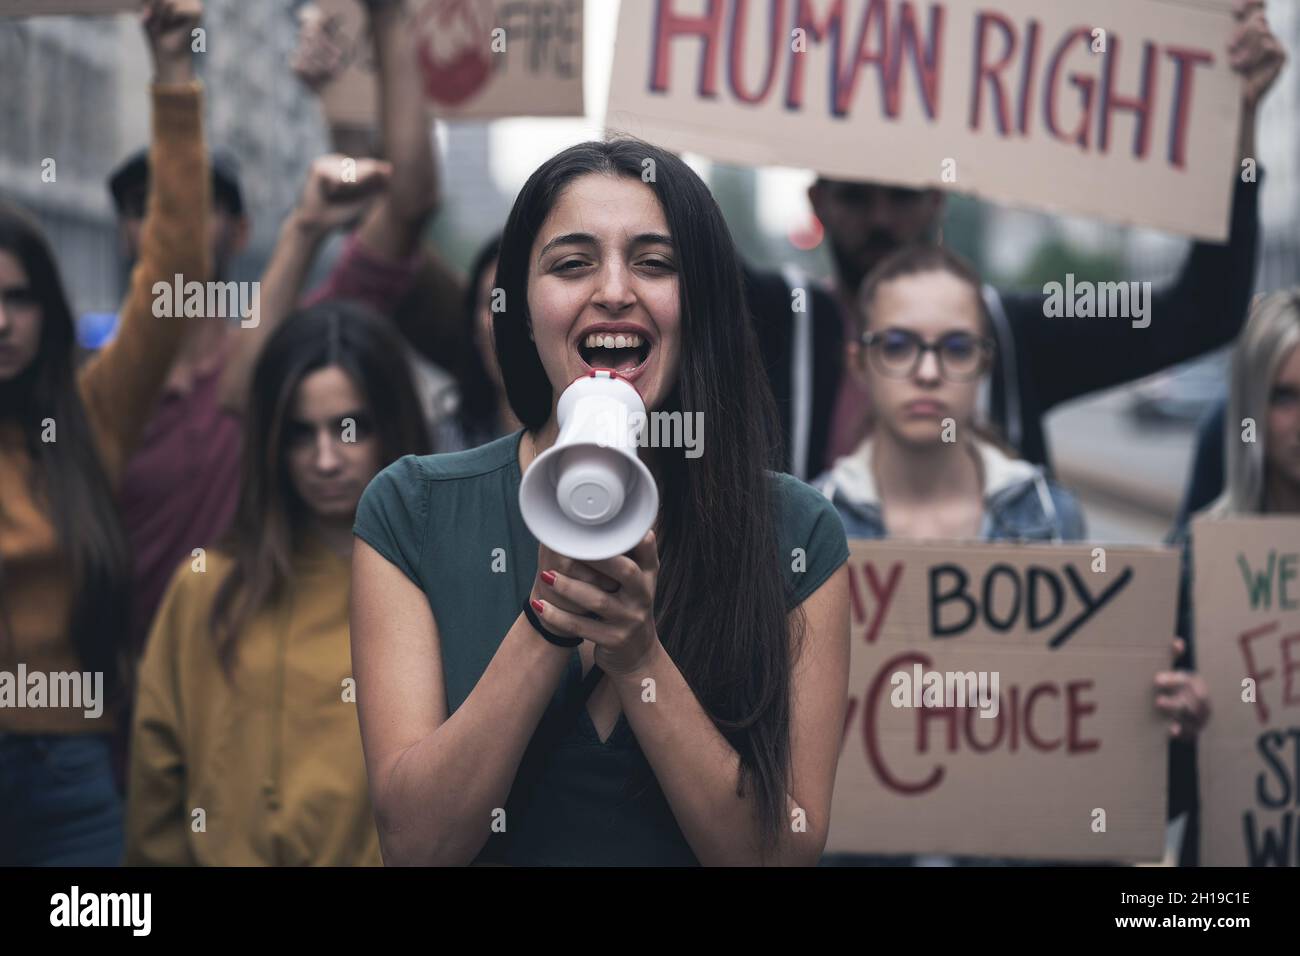 Group of young people protesting on the street with signs raised to promote human rights. Focus on the woman in front screaming to the megaphone Stock Photo